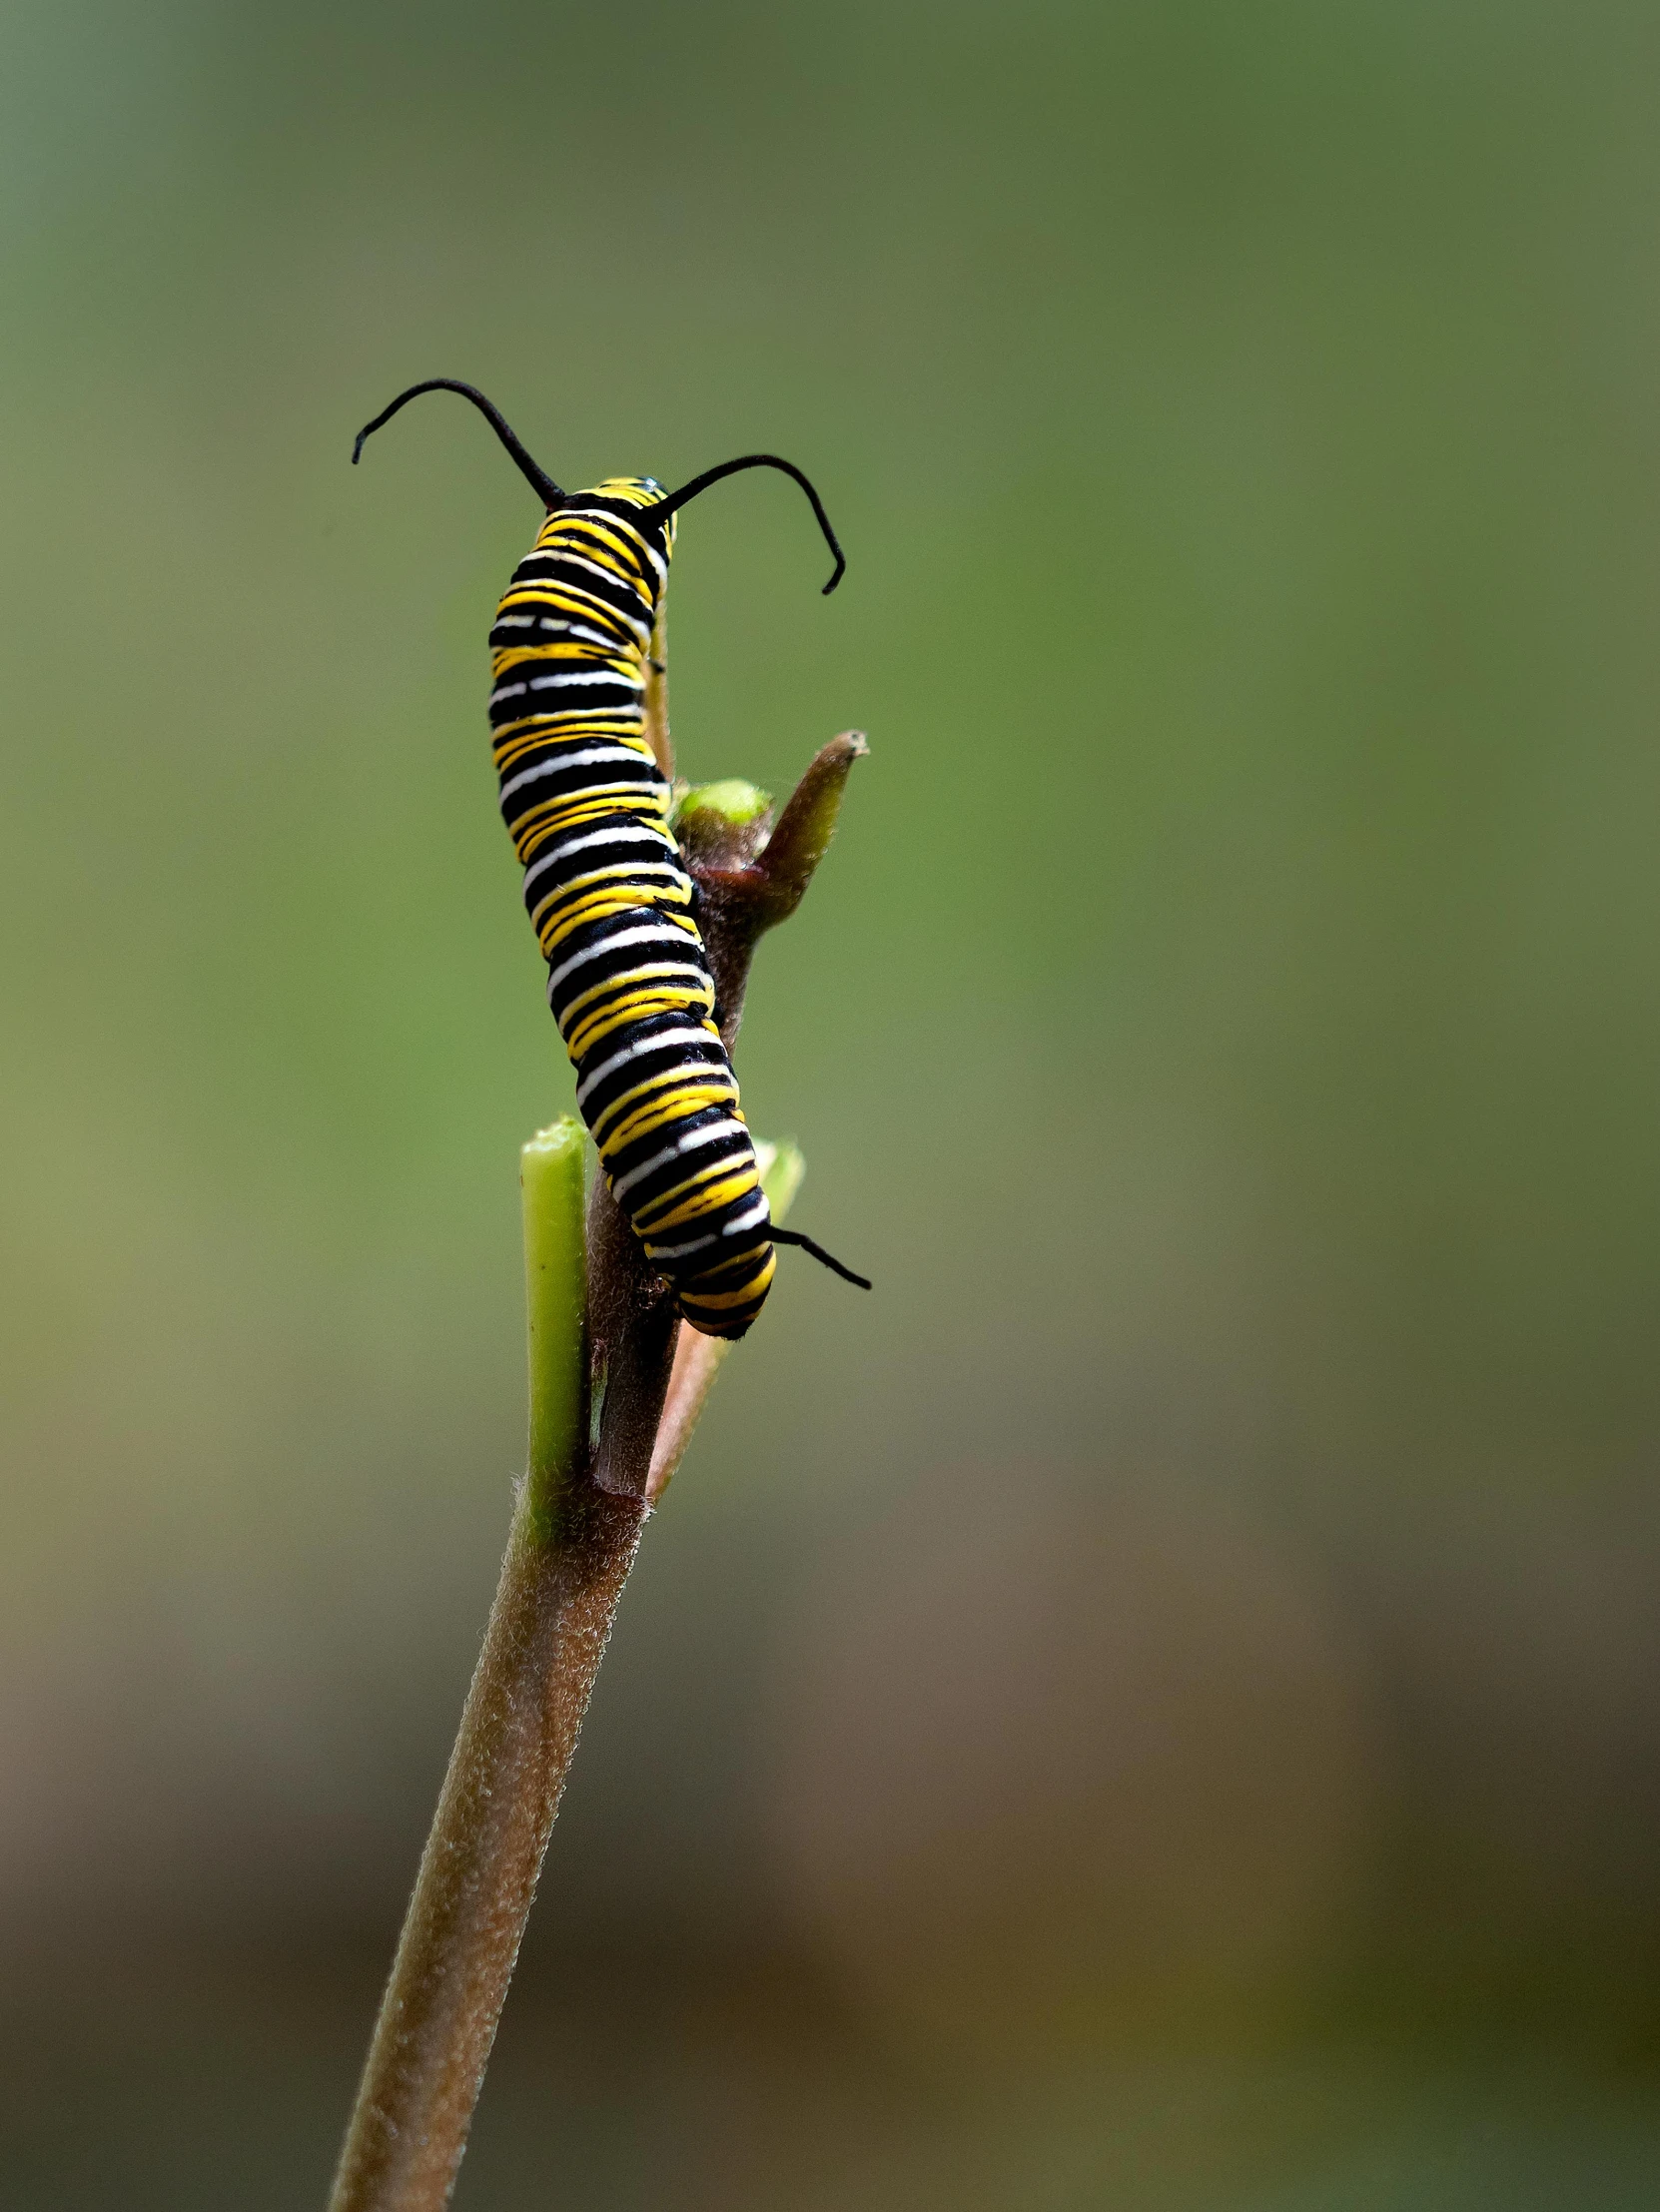 a green and yellow insect sitting on a stem